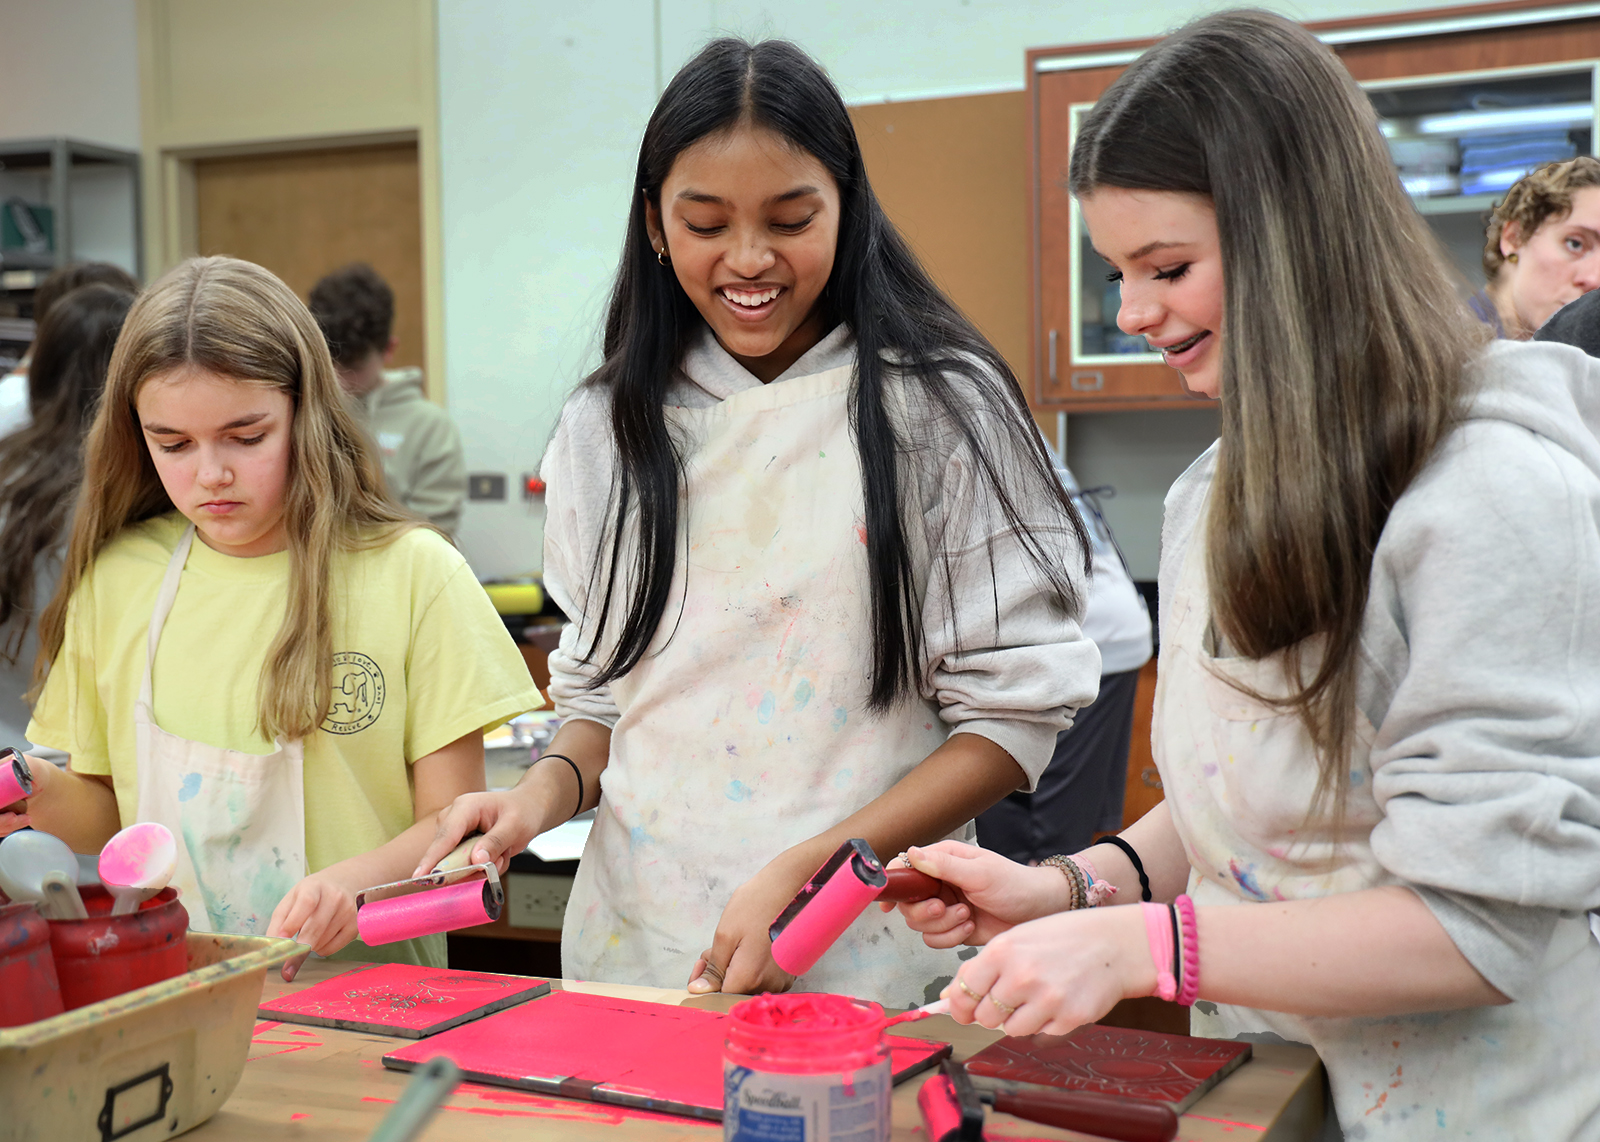 students smile while working on art